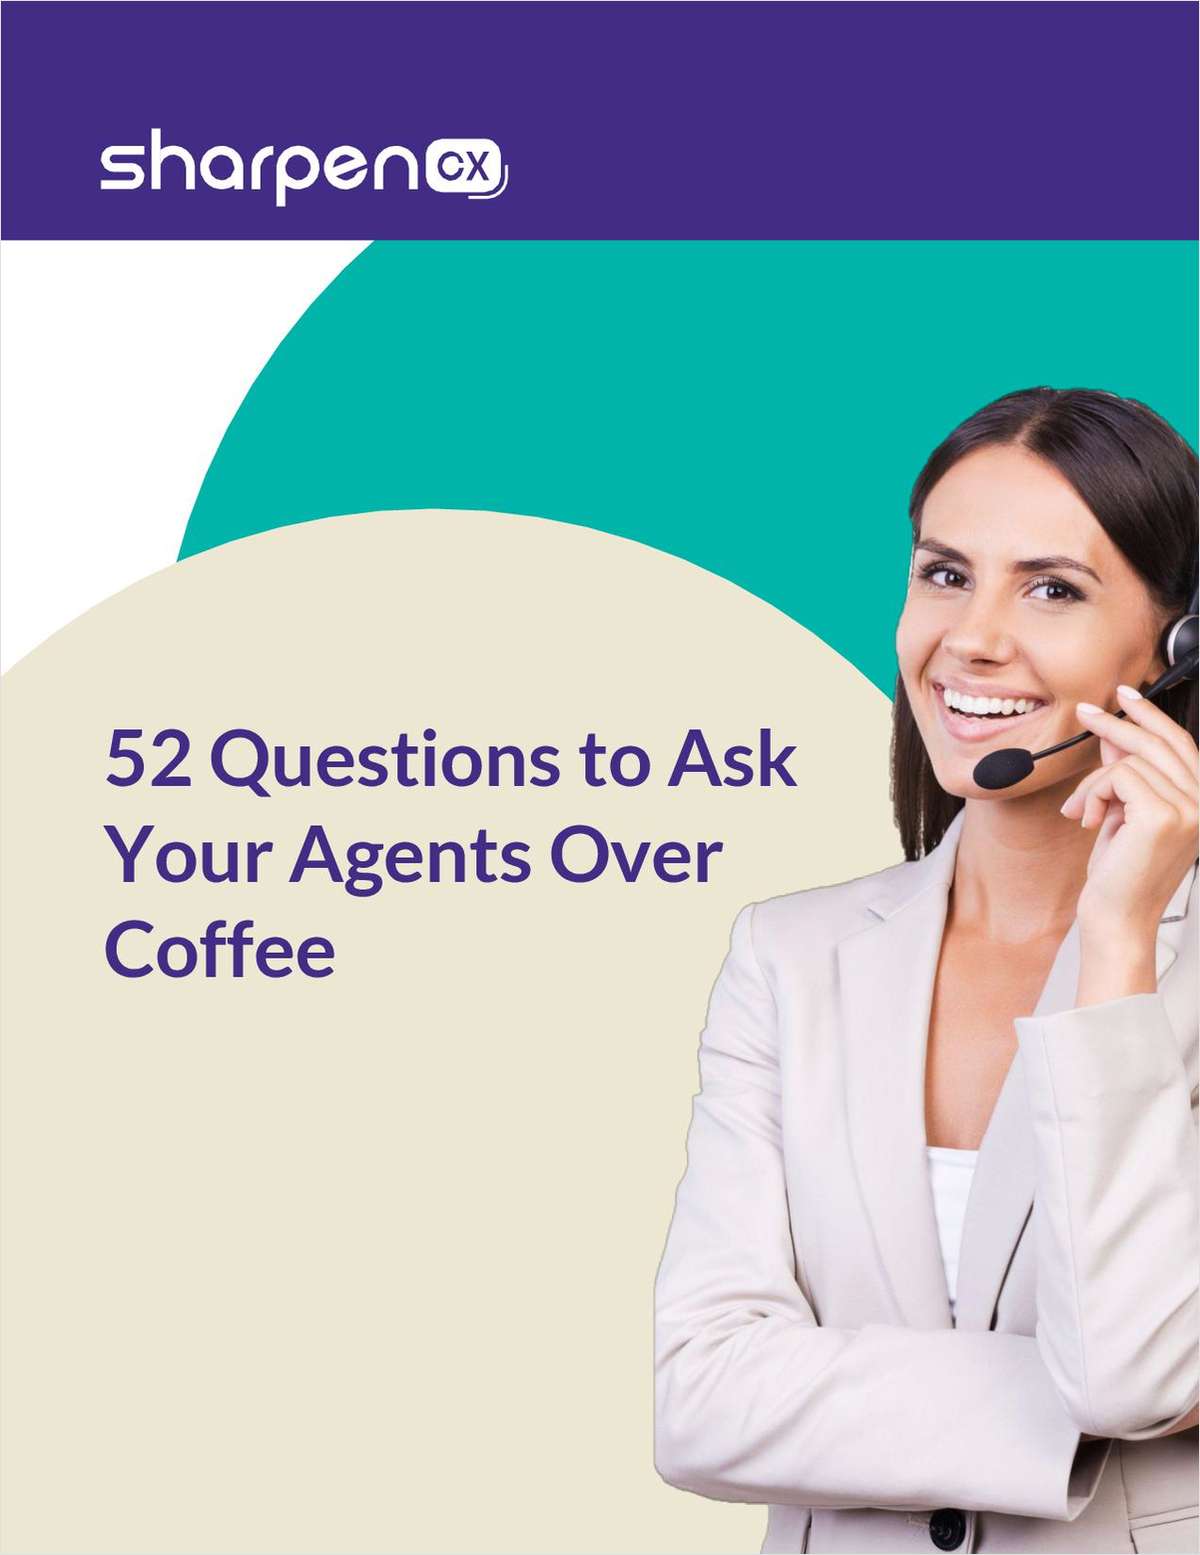 52 Questions to Ask Your Agents Over Coffee